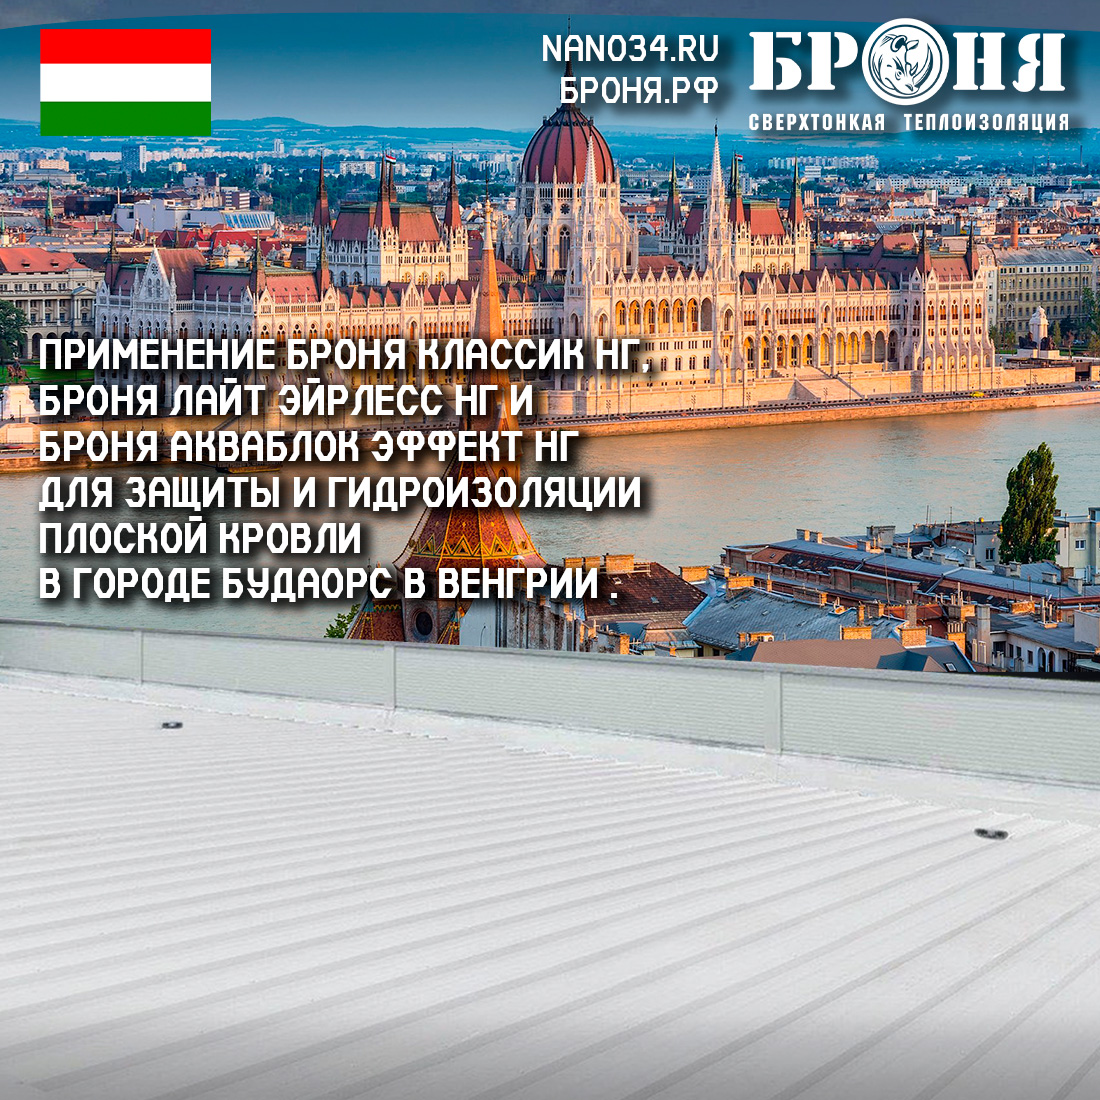 Application of Bronya Classic NF, Bronya Light Airless NF and Bronya Aquablock Effect NF for protection and waterproofing of flat roofs in Budaors, Hungary. (photos and videos)